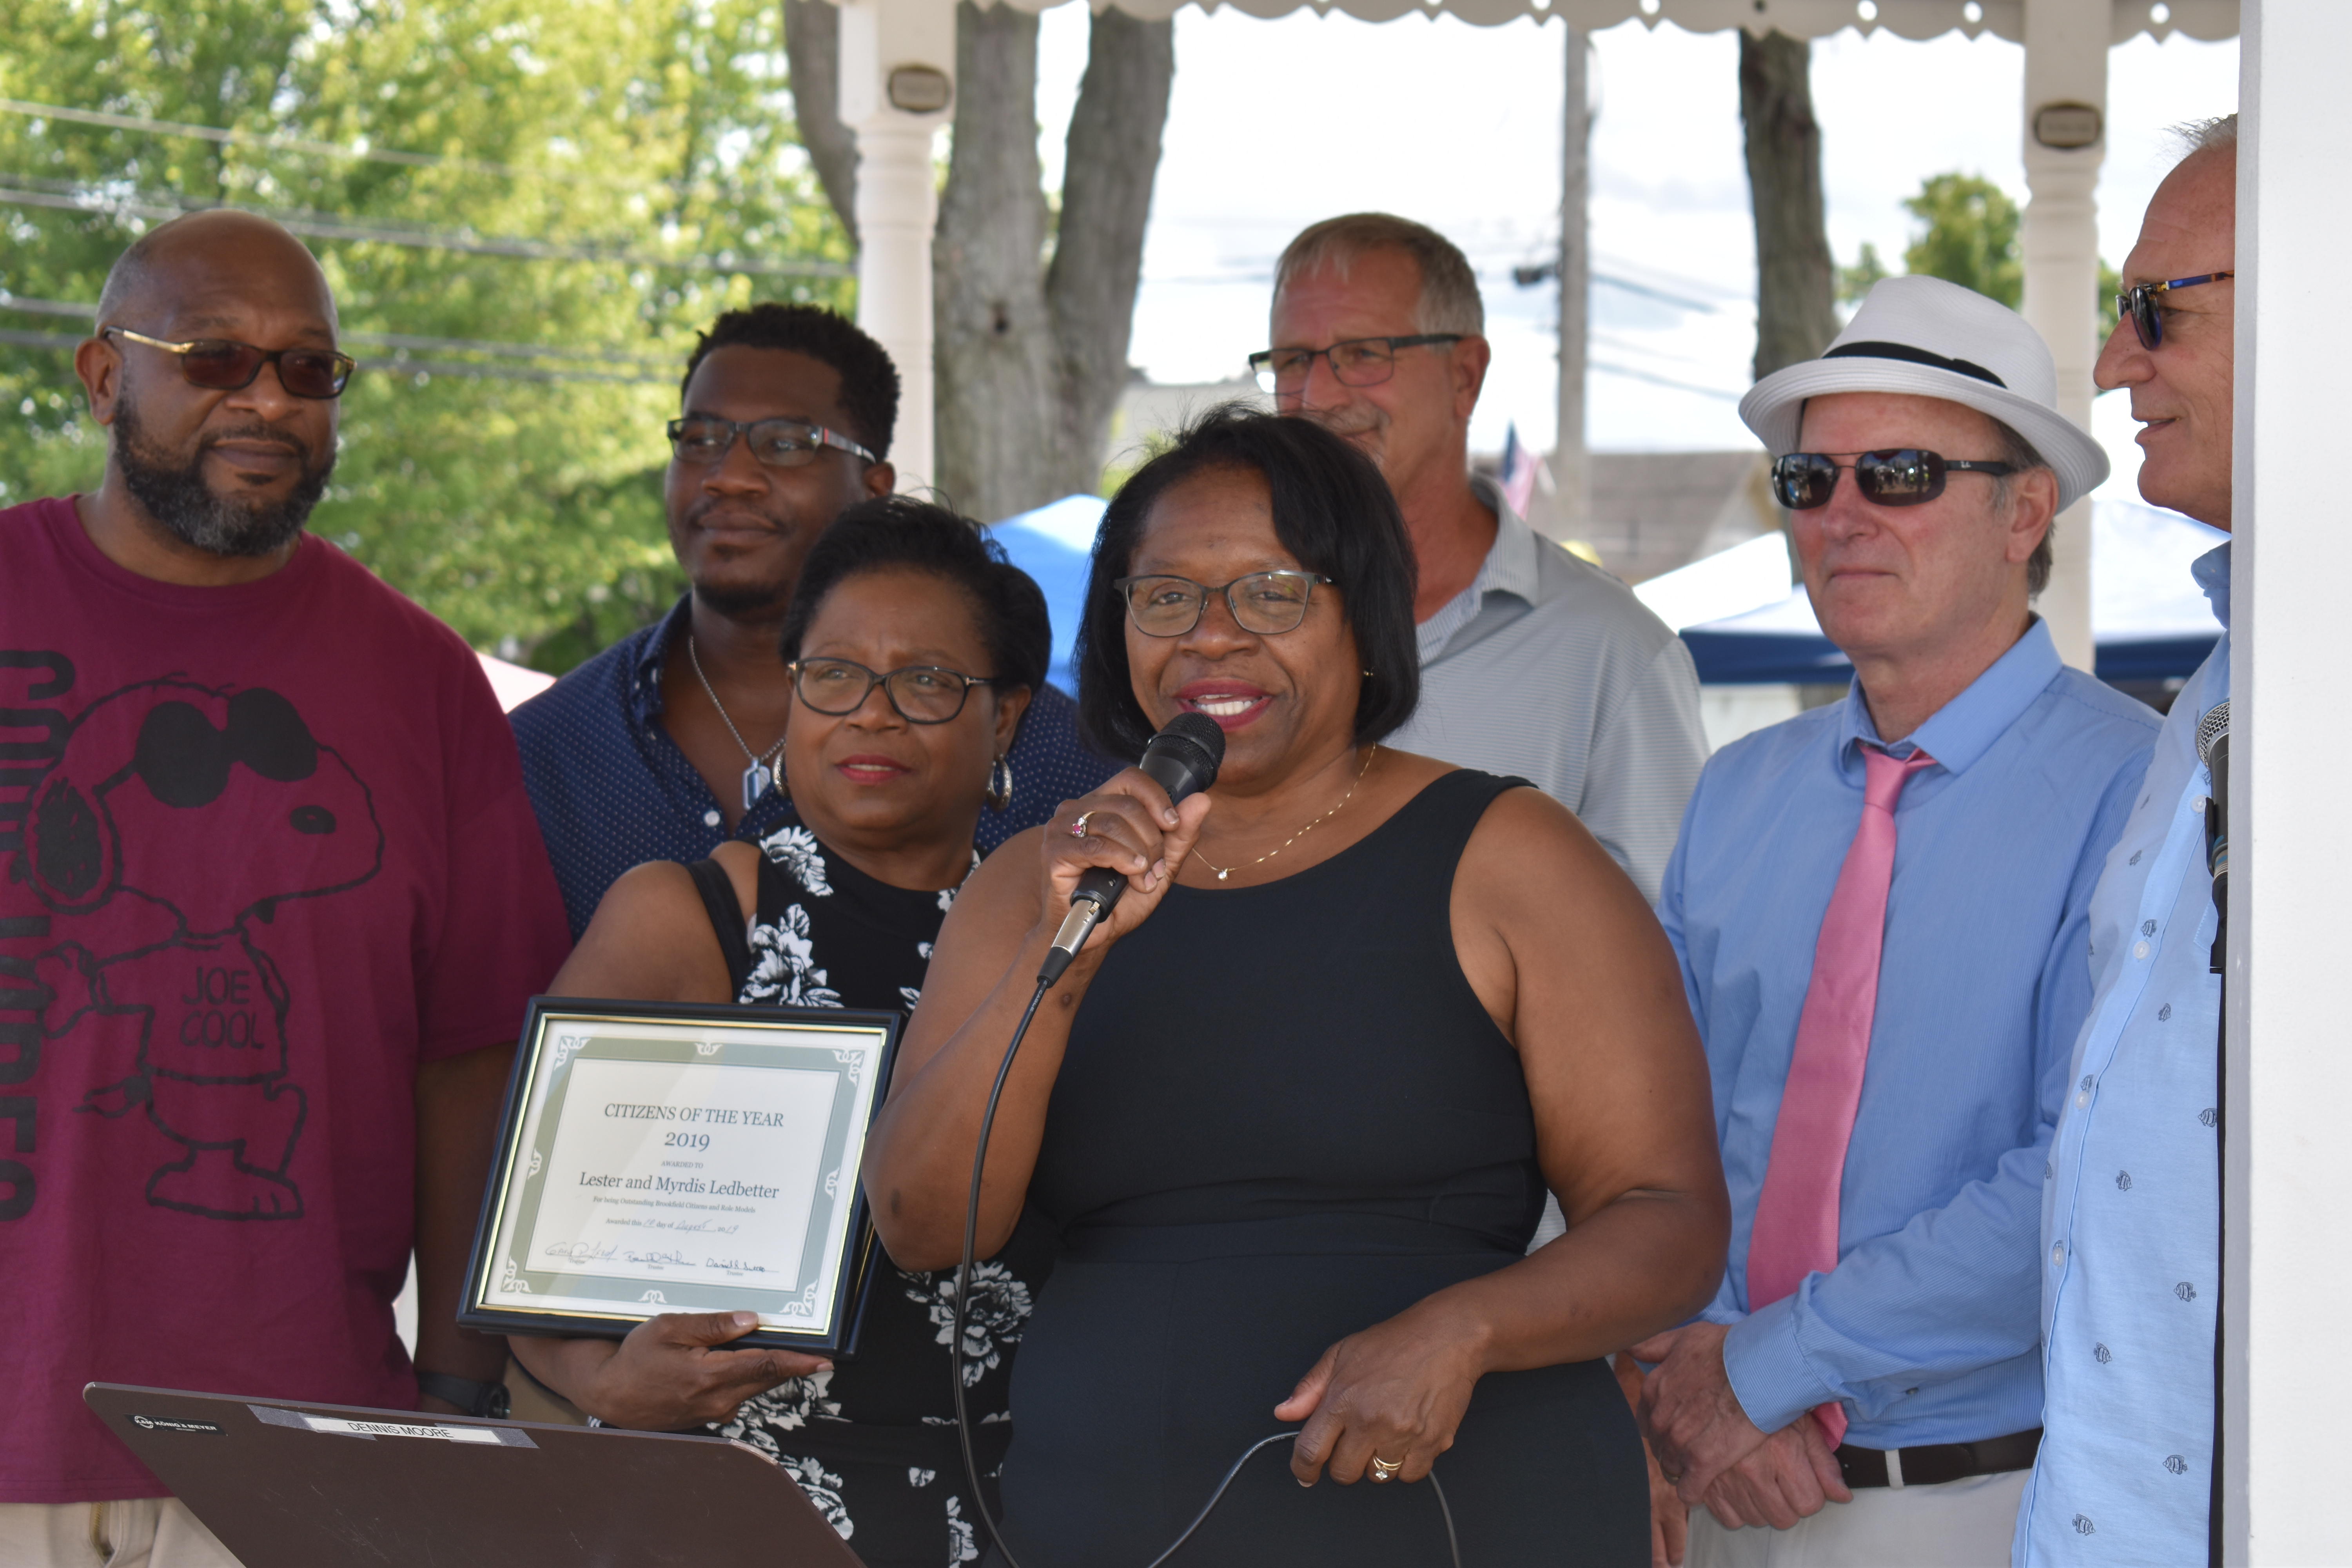 Toni-jean Glover, with microphone, accepts the Citizen of the Year award presented to her parents, Eugene and Myrdis Ledbetter. Also shown are, from left, Glover's nephews, John Ross and Eugene Ledbetter, and sister, Leslie Patterson, and Brookfield Trustees Ron Haun, Gary Lees and Dan Suttles.